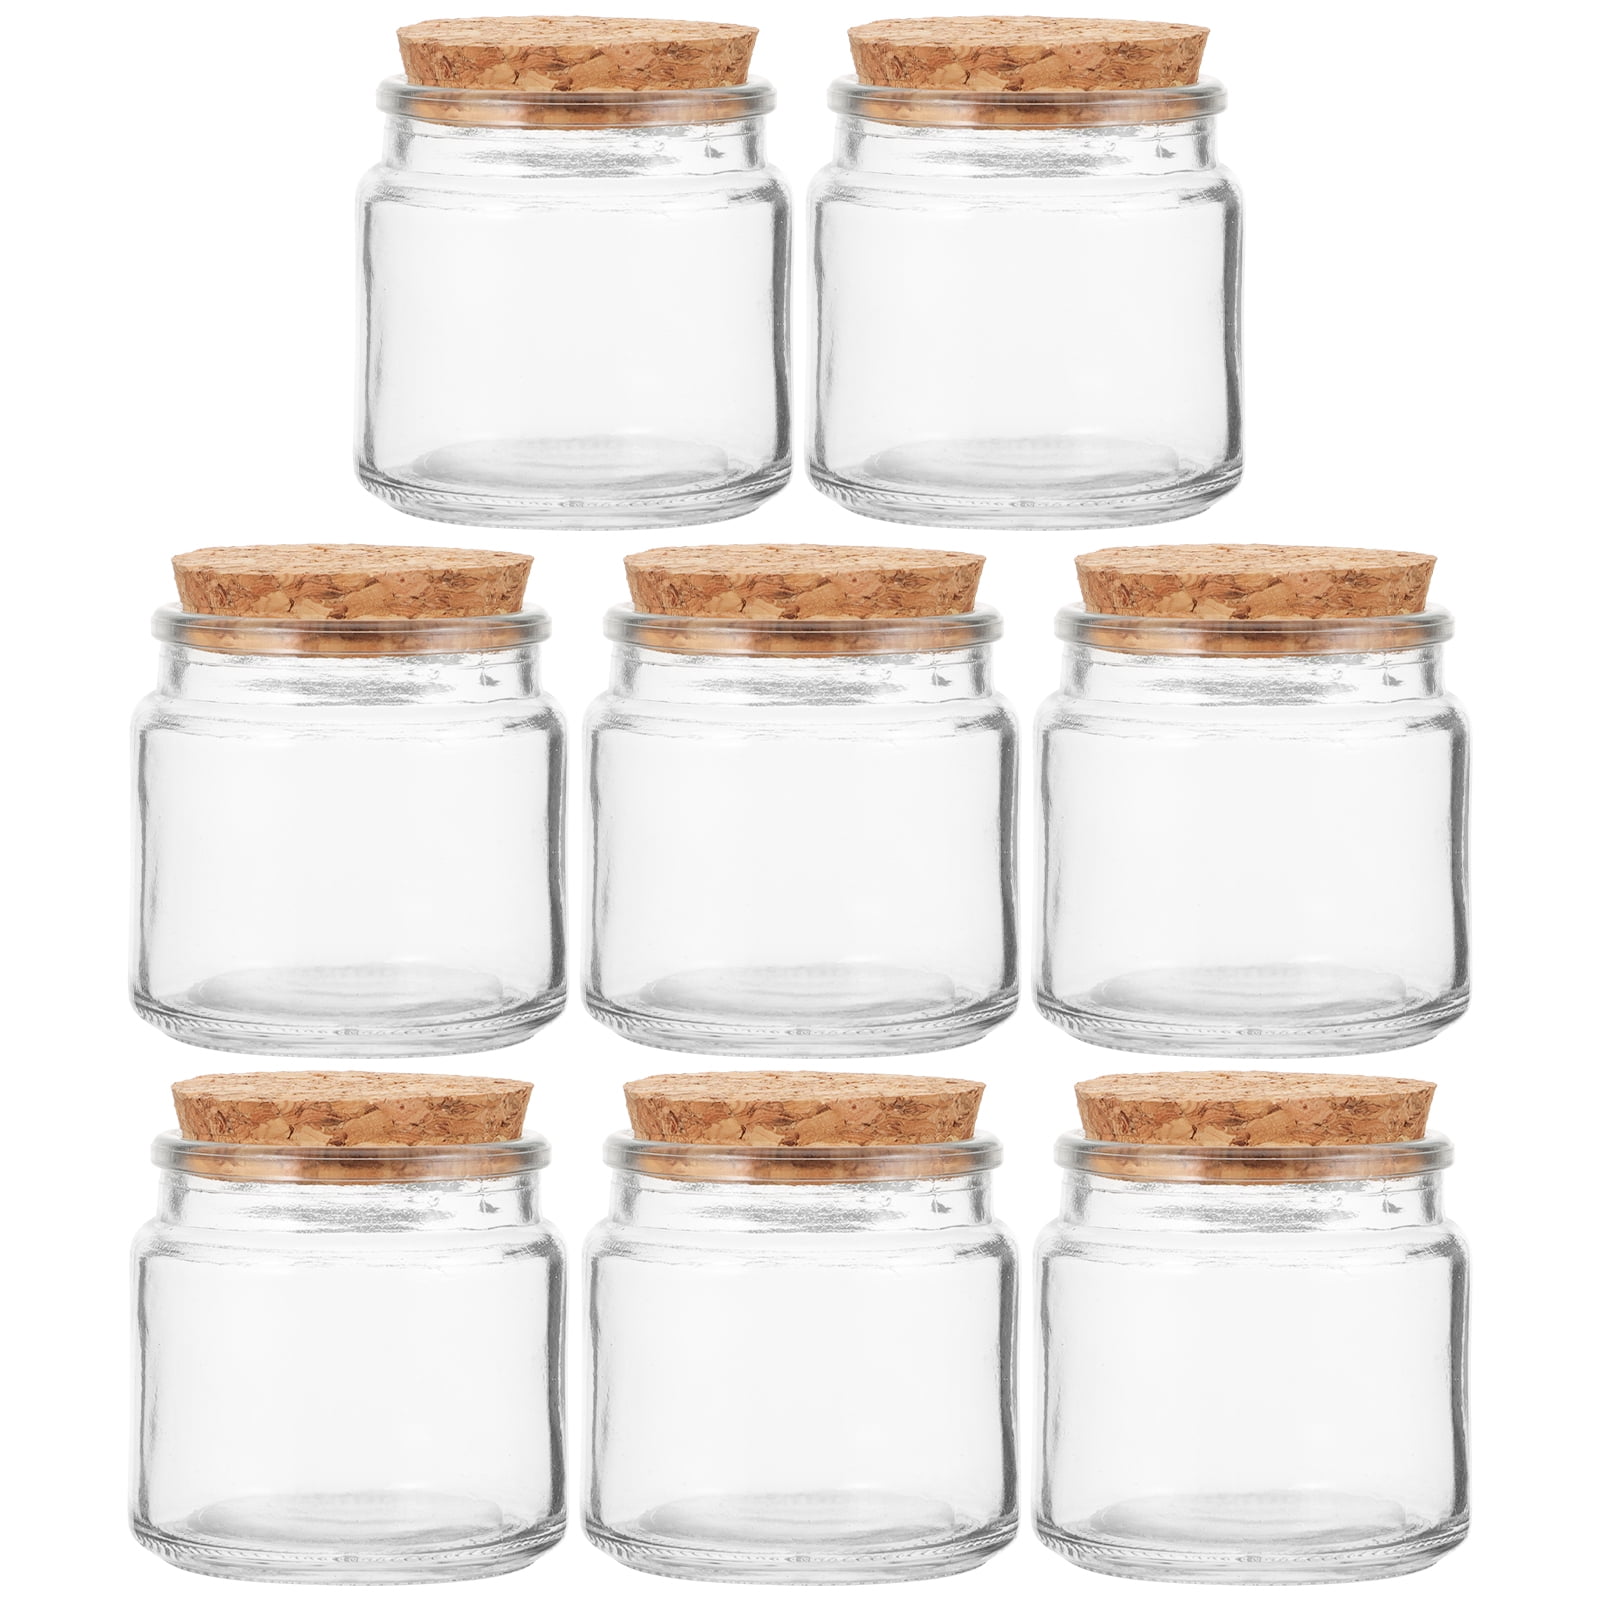 Homemaxs 8pcs Empty Candle Containers Glass Candle Jars Candle Making Jars with Lids Clear Candle Jars, Size: 6.5x6cm